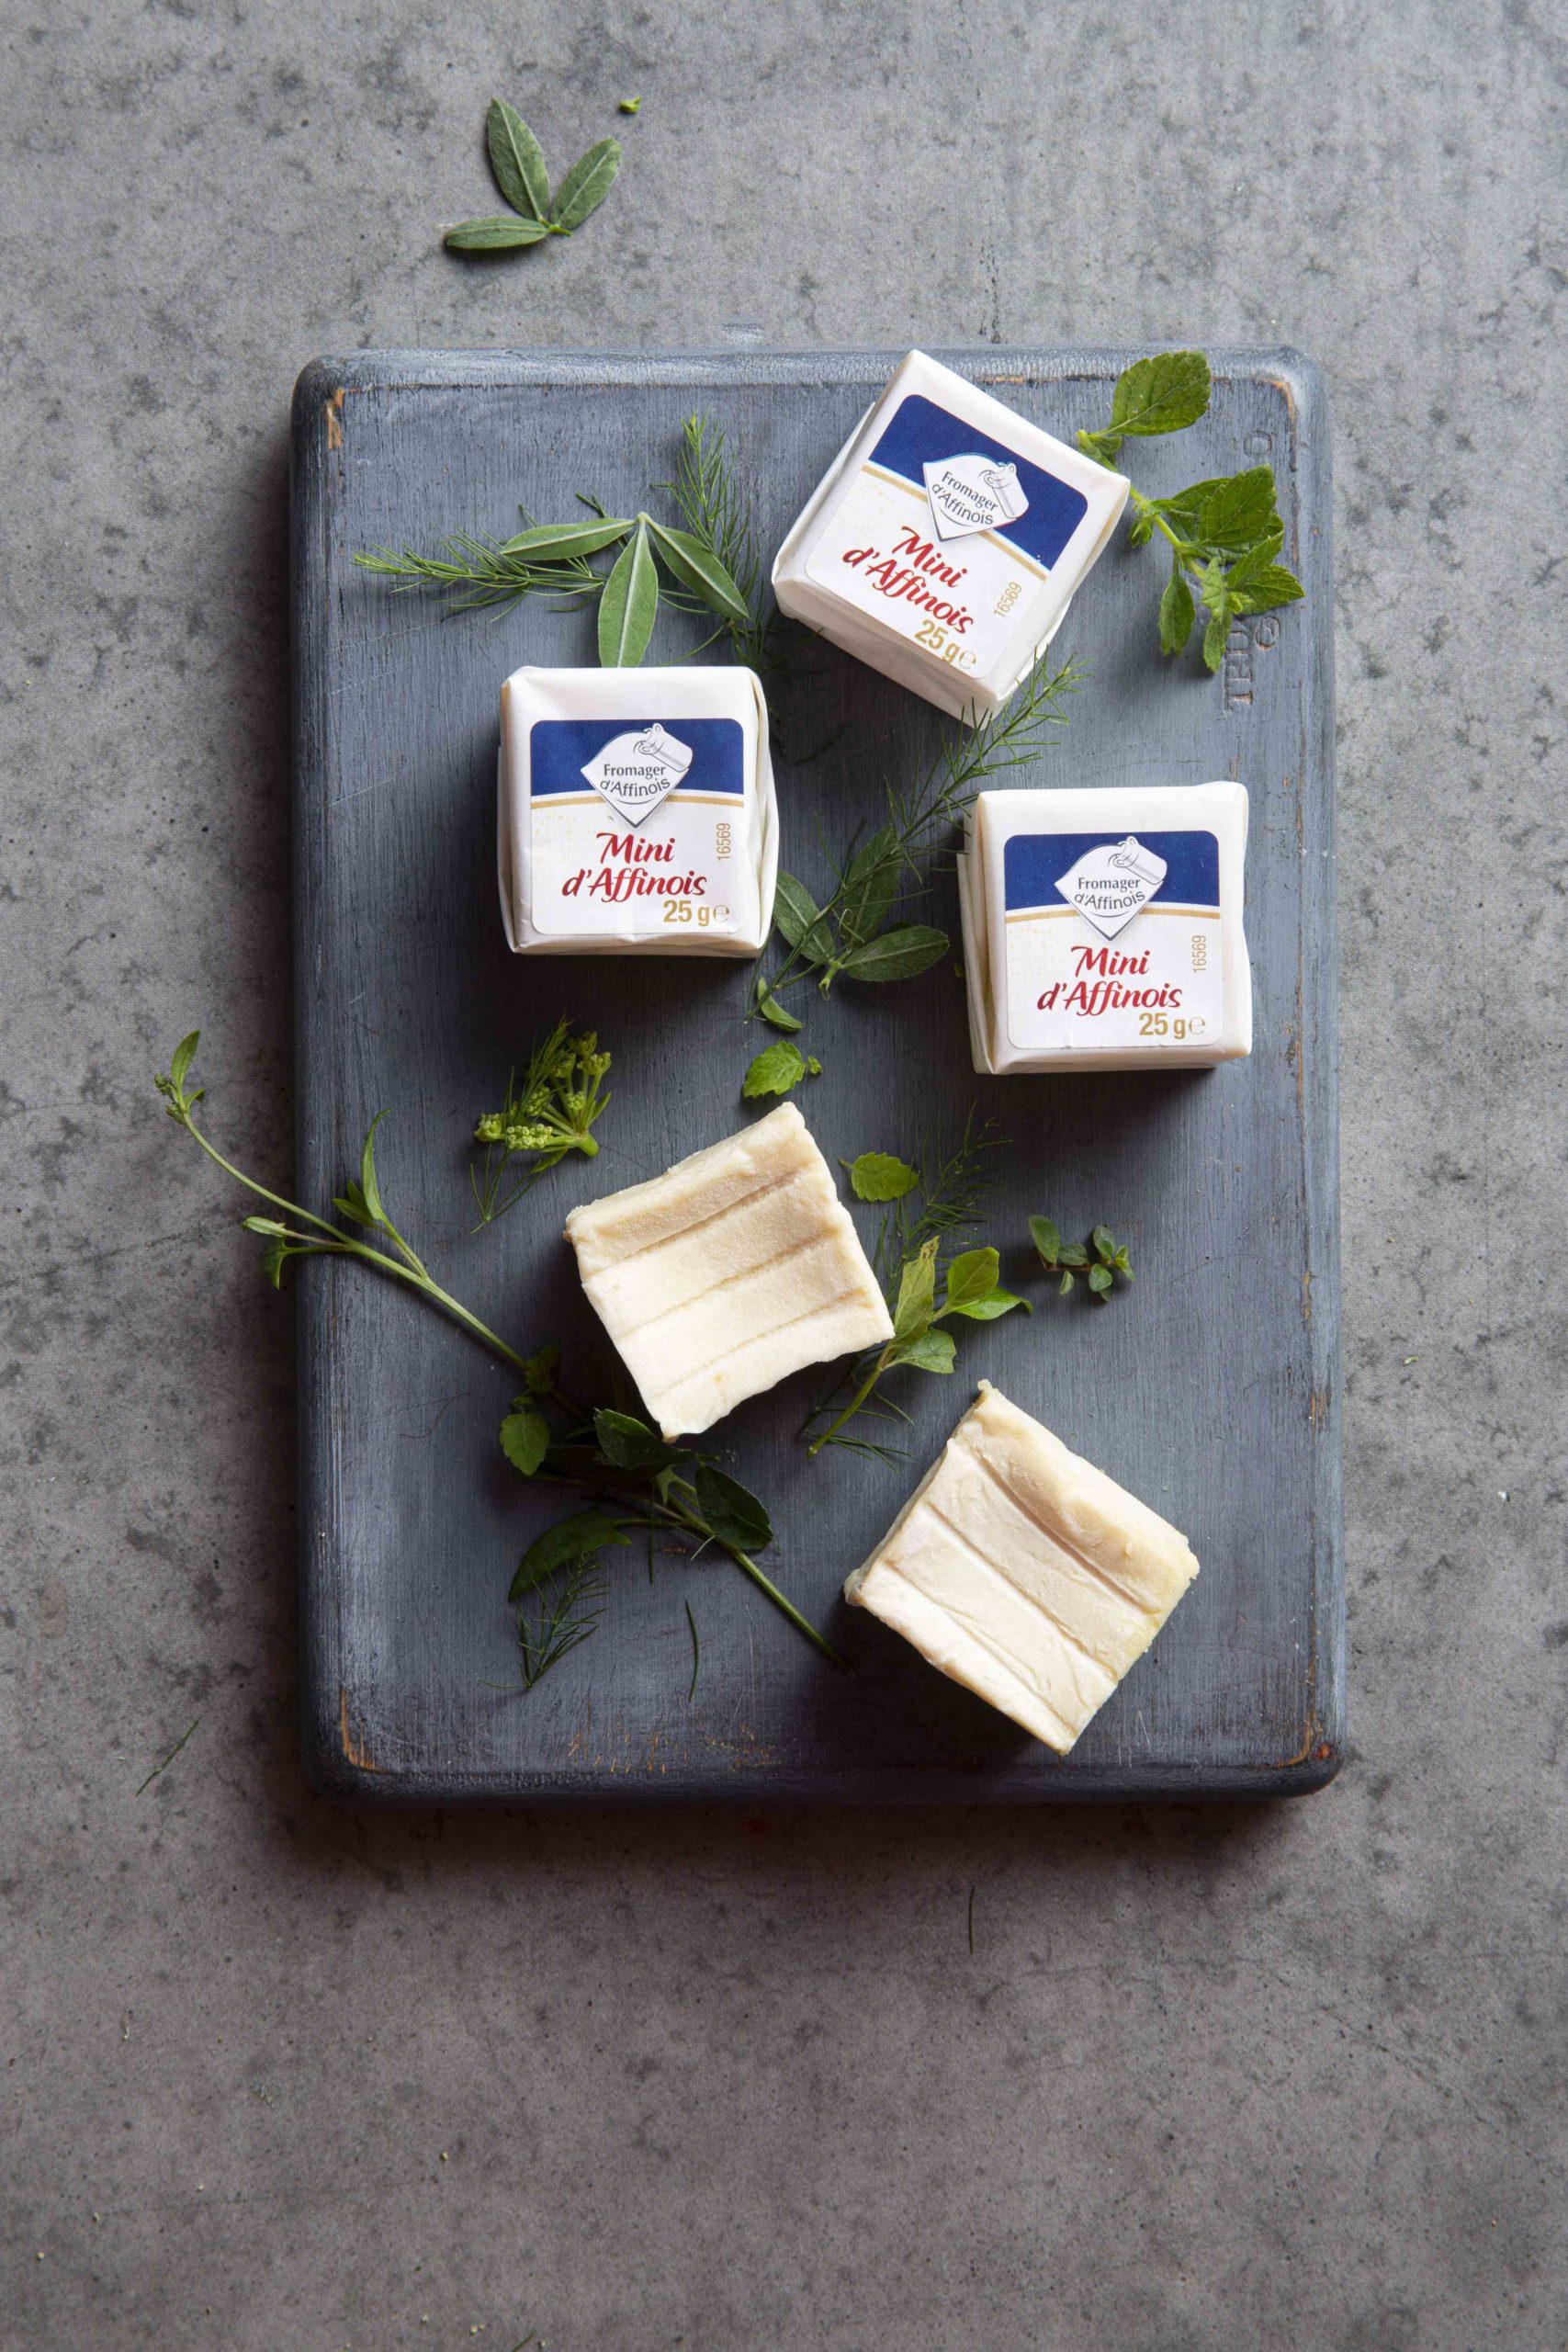 fromager d'affinois minis d'affinois pocket size